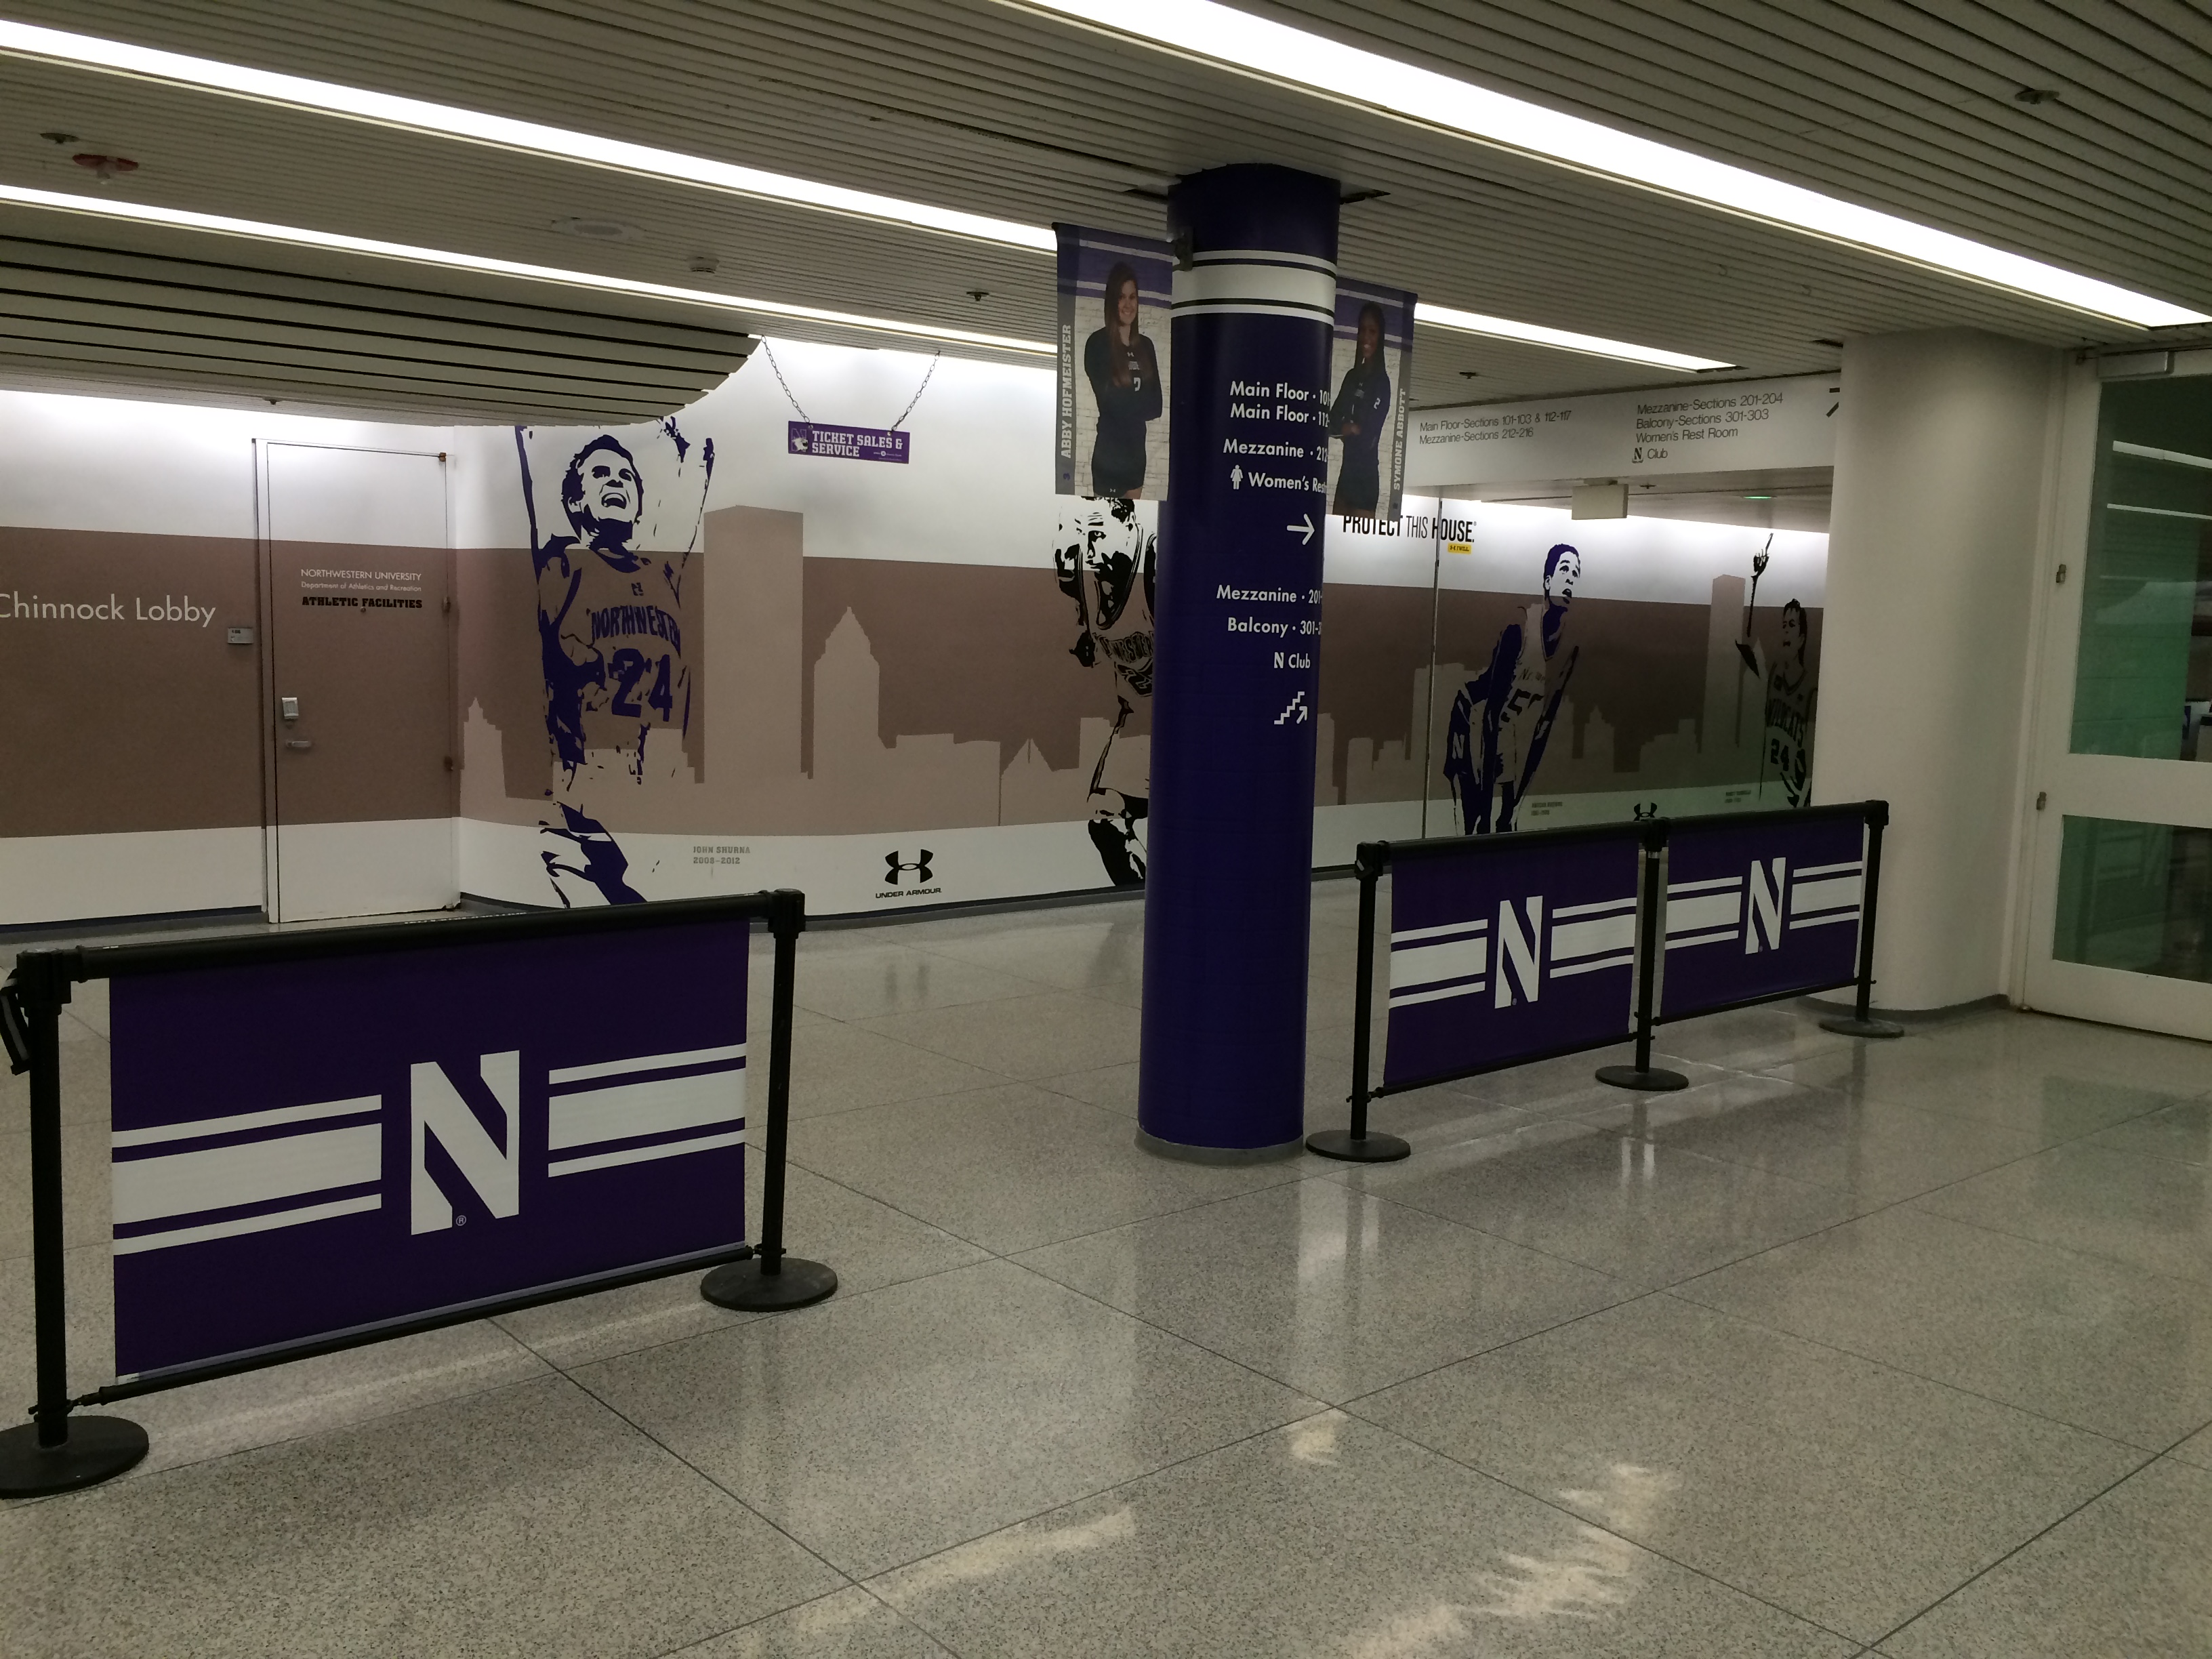 Q-Banner Retractable Belt Stanchion Queue Post Advertising System on Display at Northwestern University